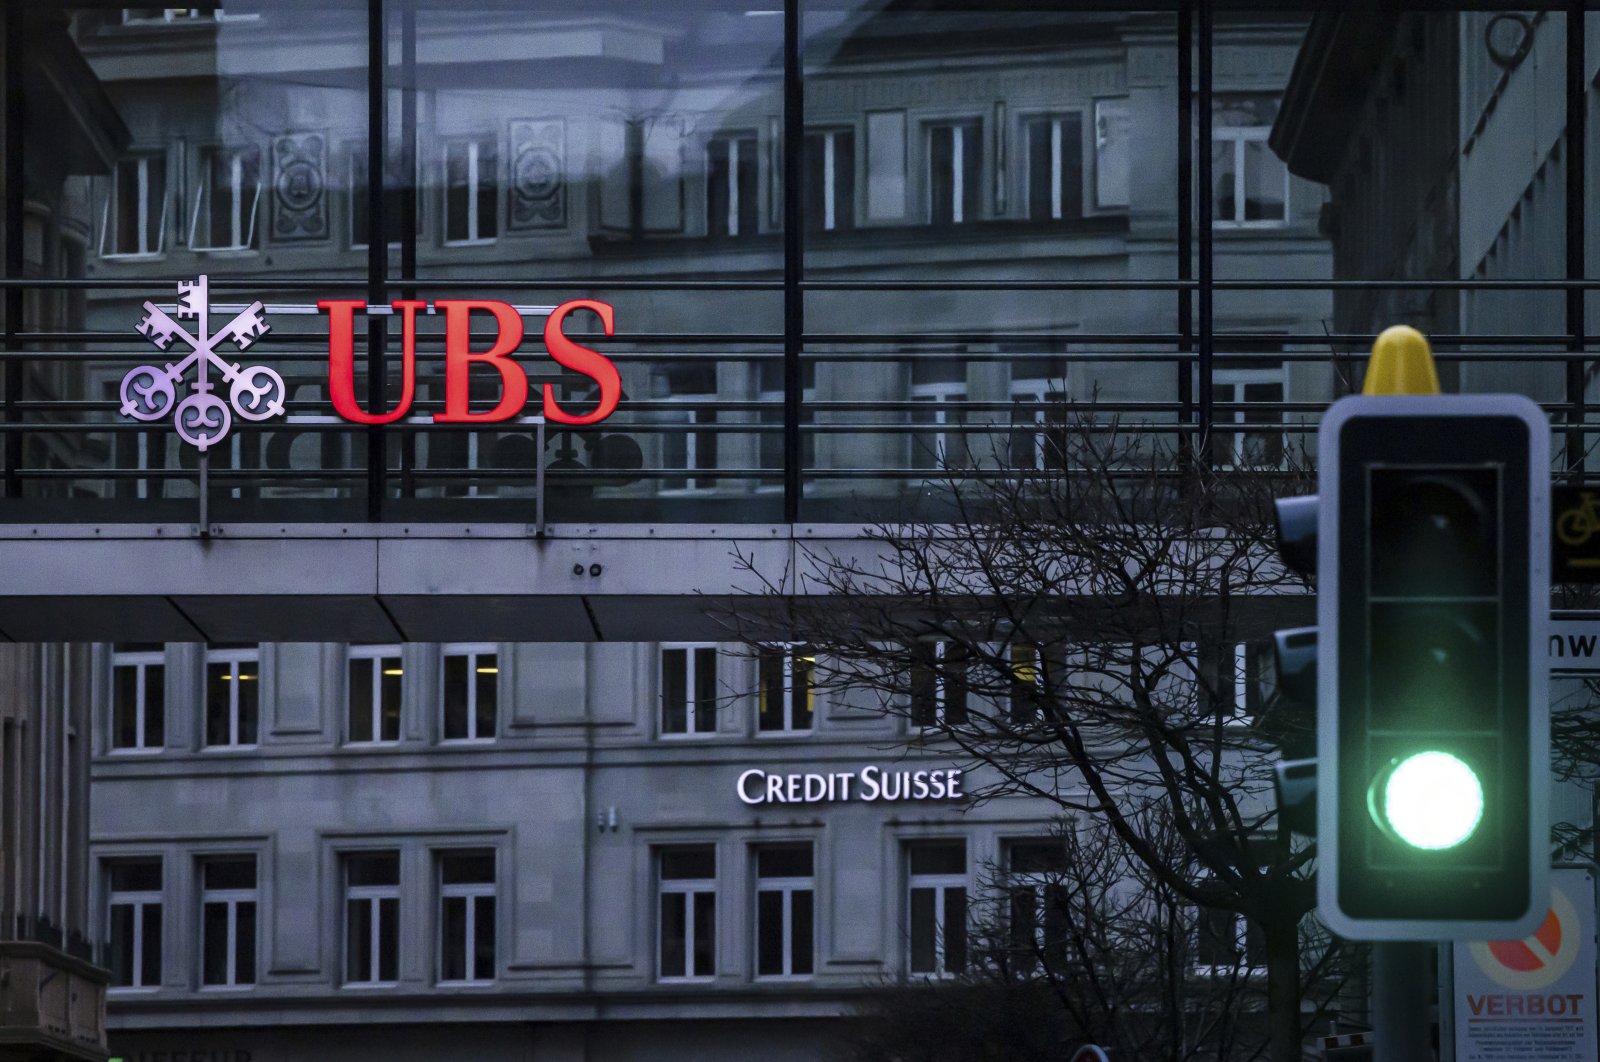 A traffic light signals green in front of the logos of the Swiss banks Credit Suisse and UBS in Zurich, Switzerland, March 19, 2023. (AP Photo)